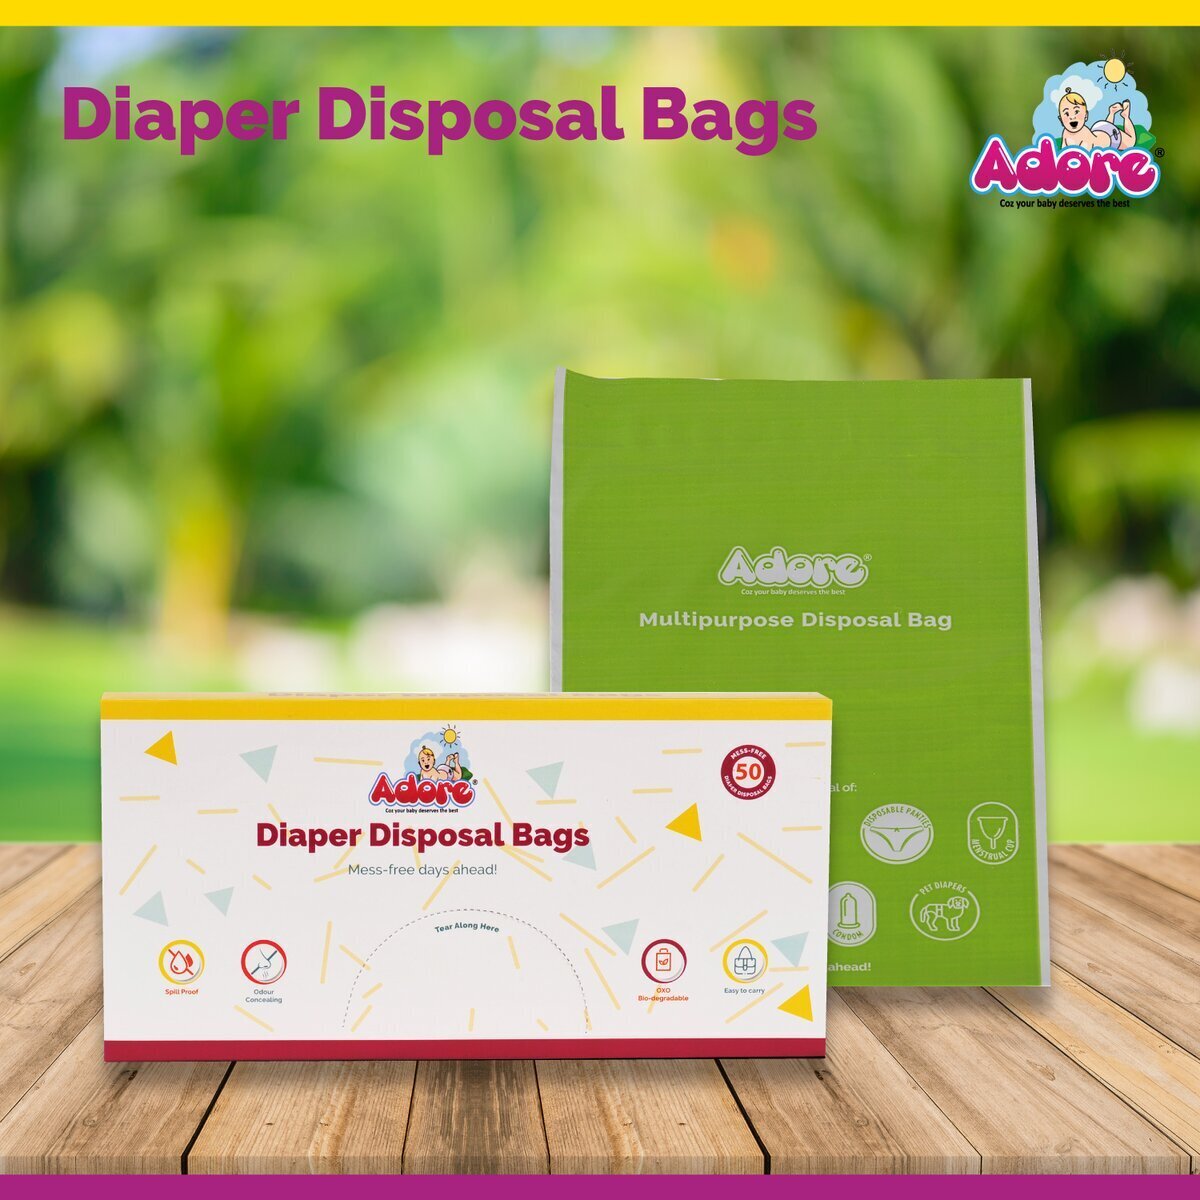 Buy 120pc Tooshies Biodegradable On The Go Baby Nappy/Diaper Disposal Bags  16x23cm Online | Kogan.com. .